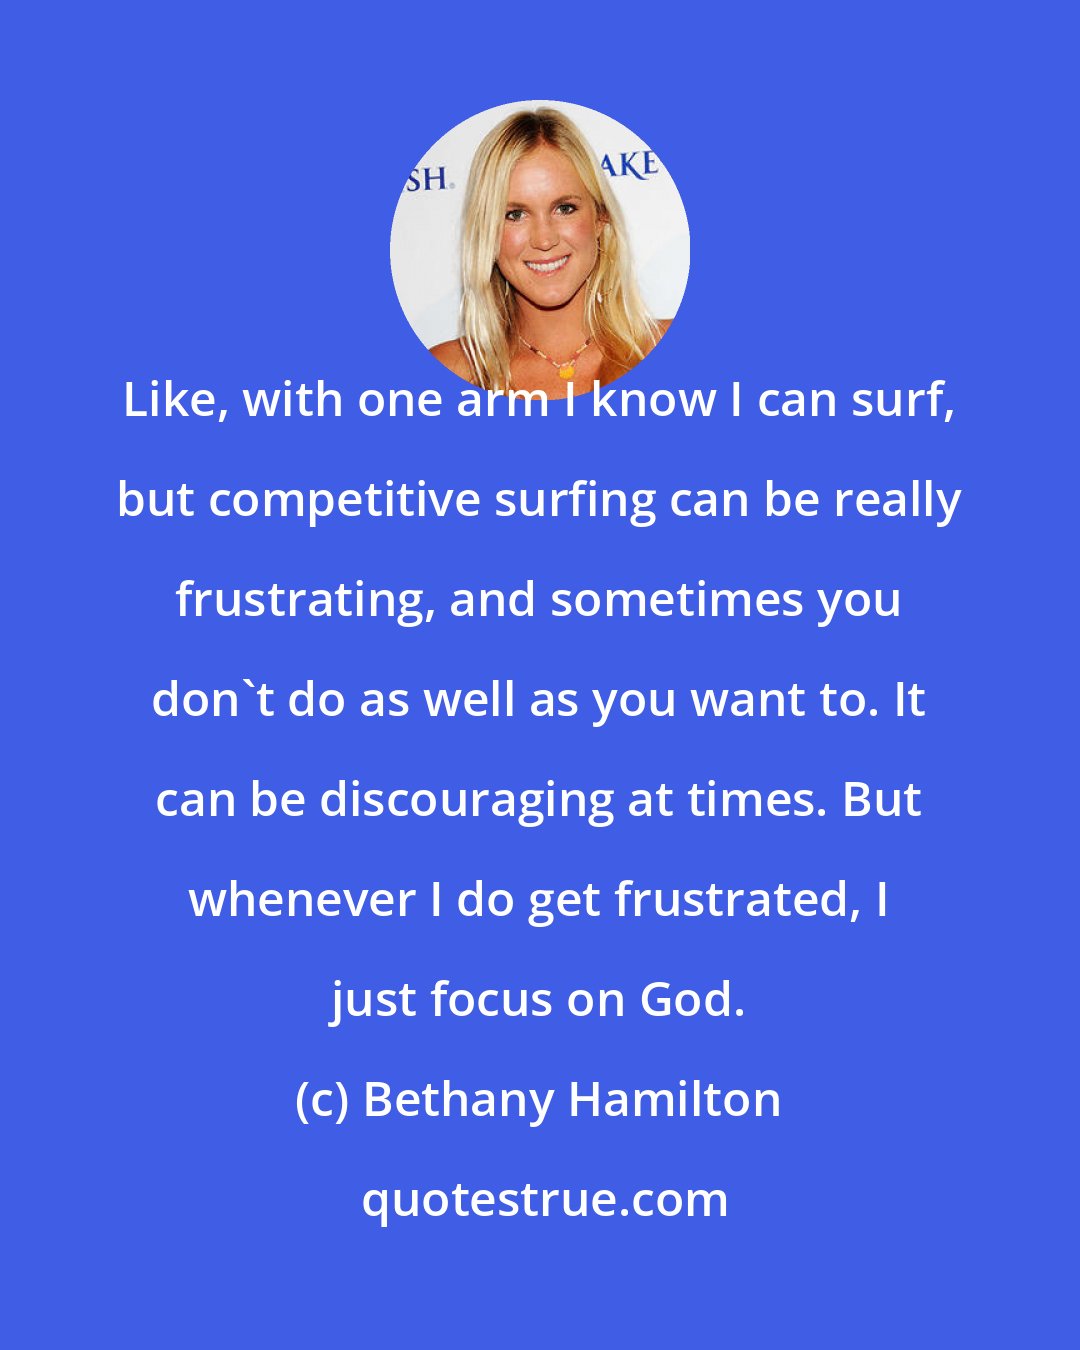 Bethany Hamilton: Like, with one arm I know I can surf, but competitive surfing can be really frustrating, and sometimes you don't do as well as you want to. It can be discouraging at times. But whenever I do get frustrated, I just focus on God.